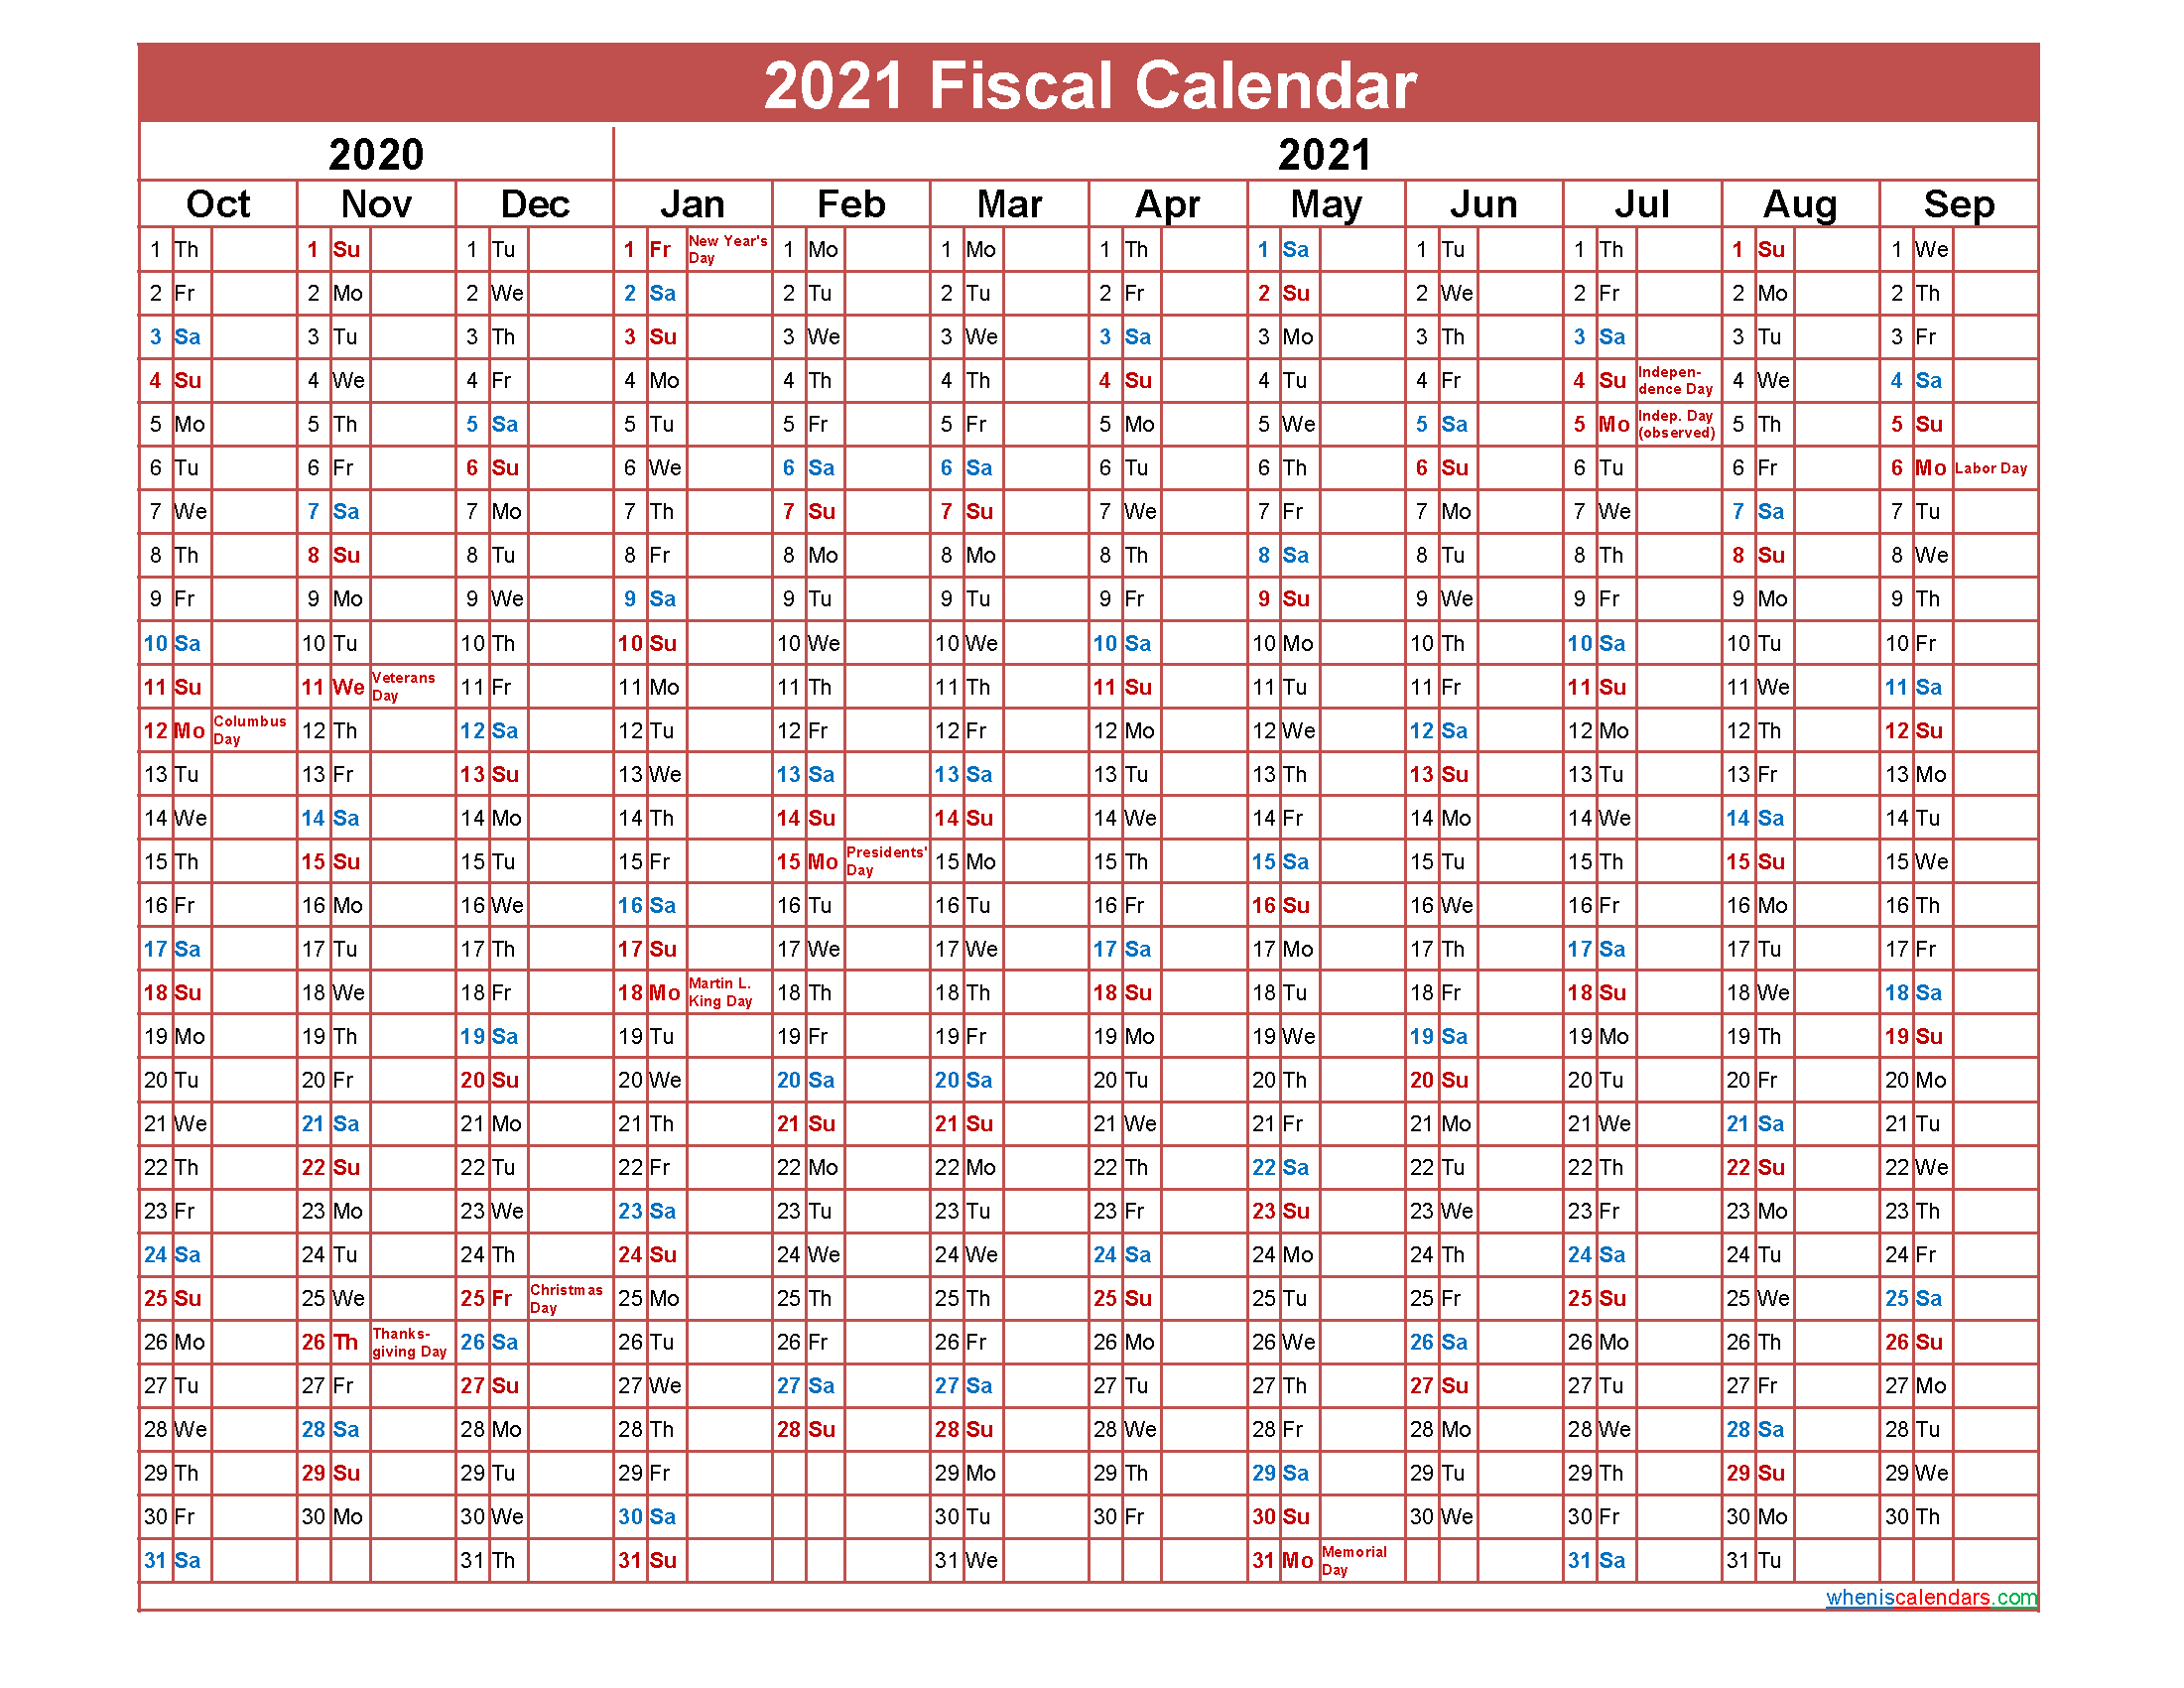 Download a 2021 Fiscal Calendar in a variety of different formats and color...